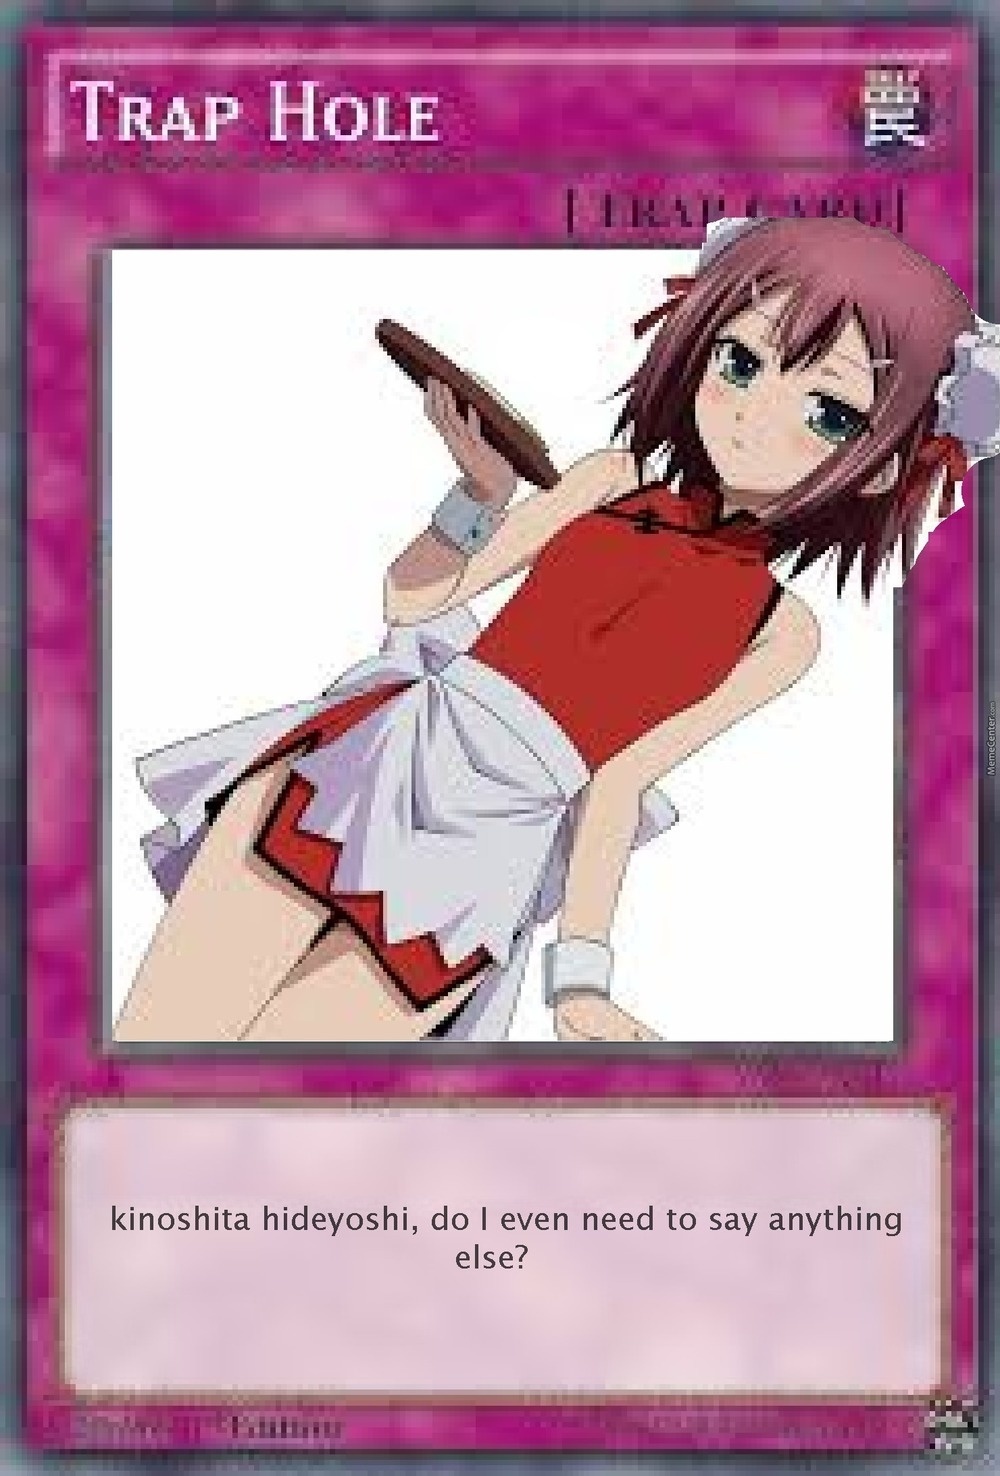 You have activated my Trap card. 